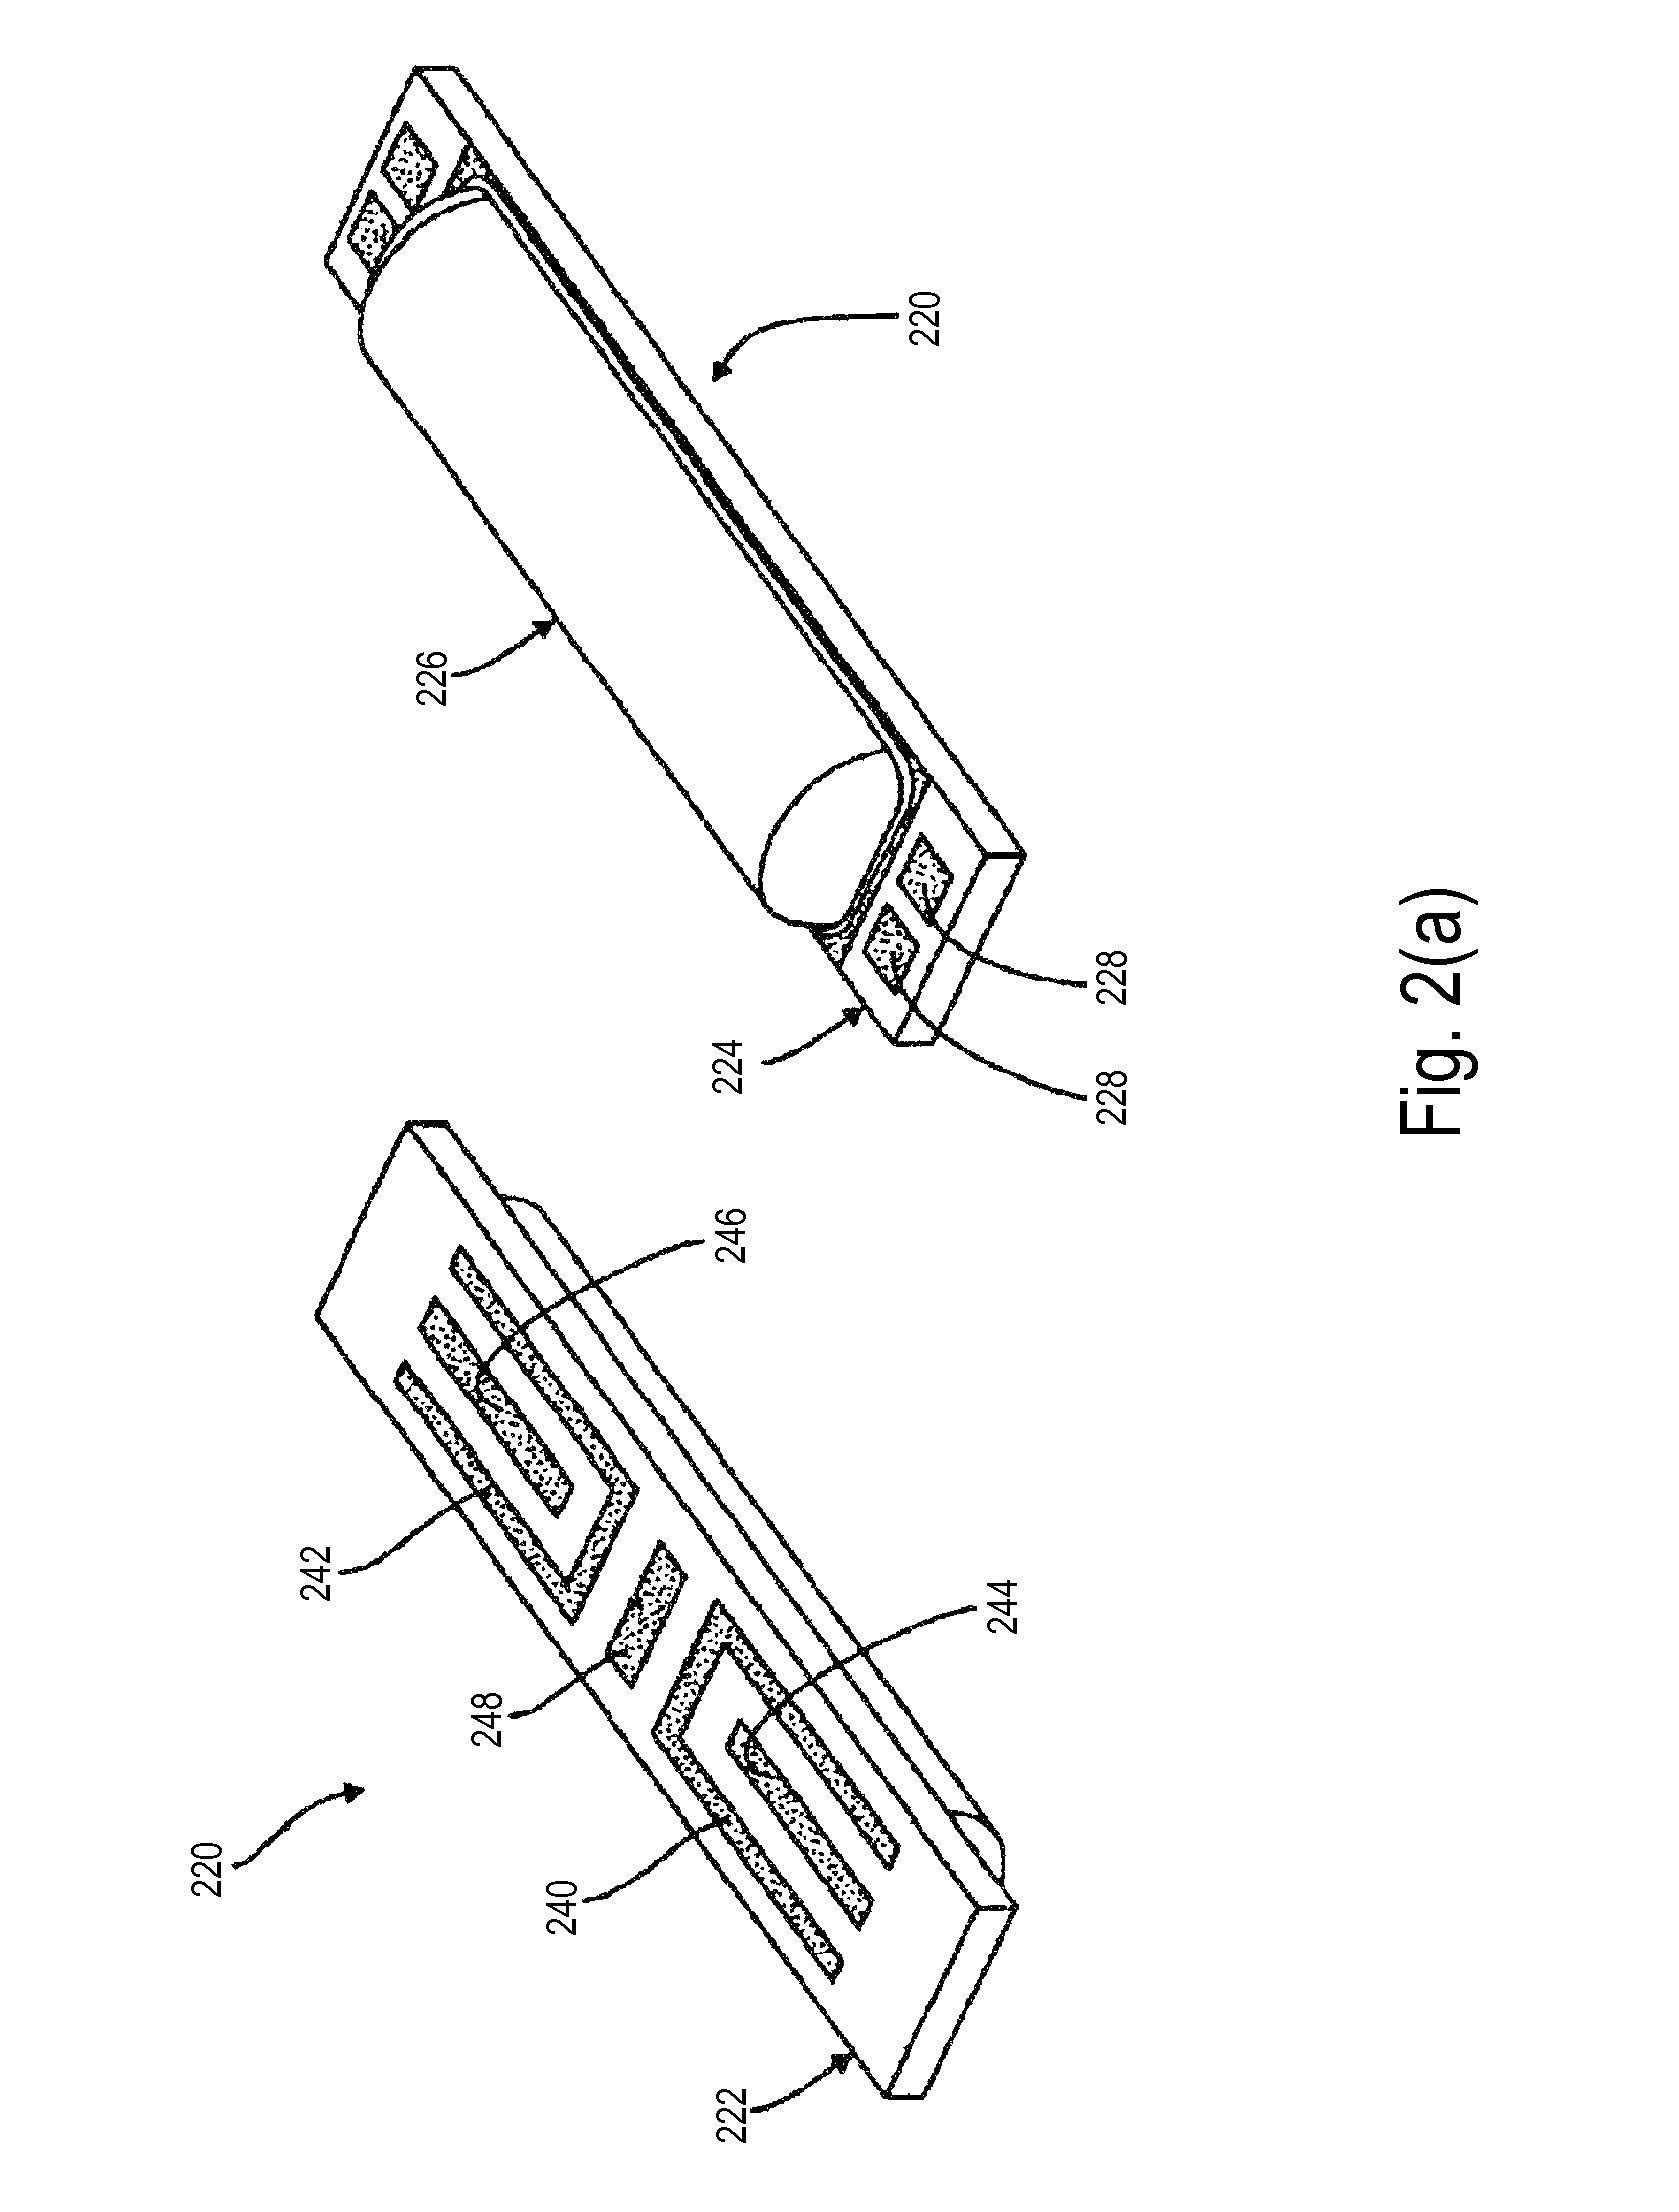 Method and system for detecting age, hydration, and functional states of sensors using electrochemical impedance spectroscopy